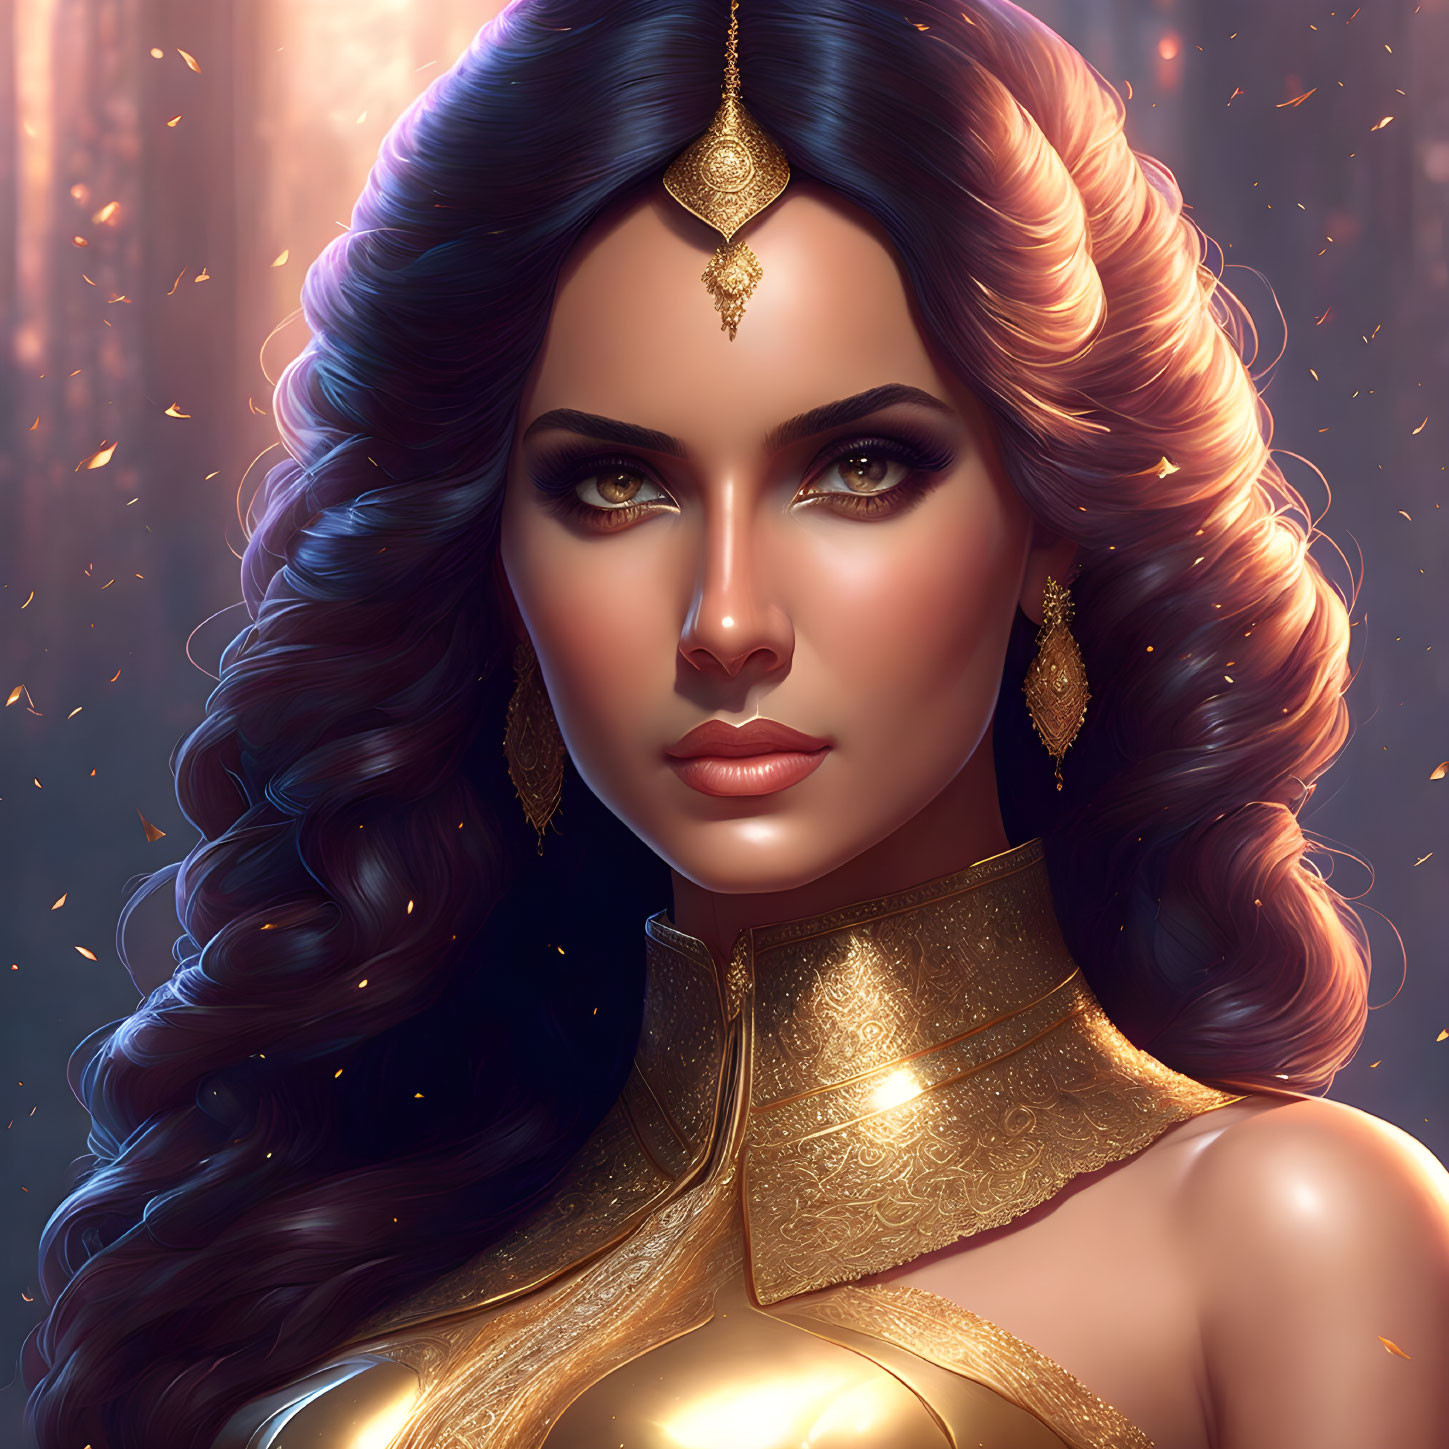 Woman with Striking Features and Gold Jewelry Under Dramatic Lighting